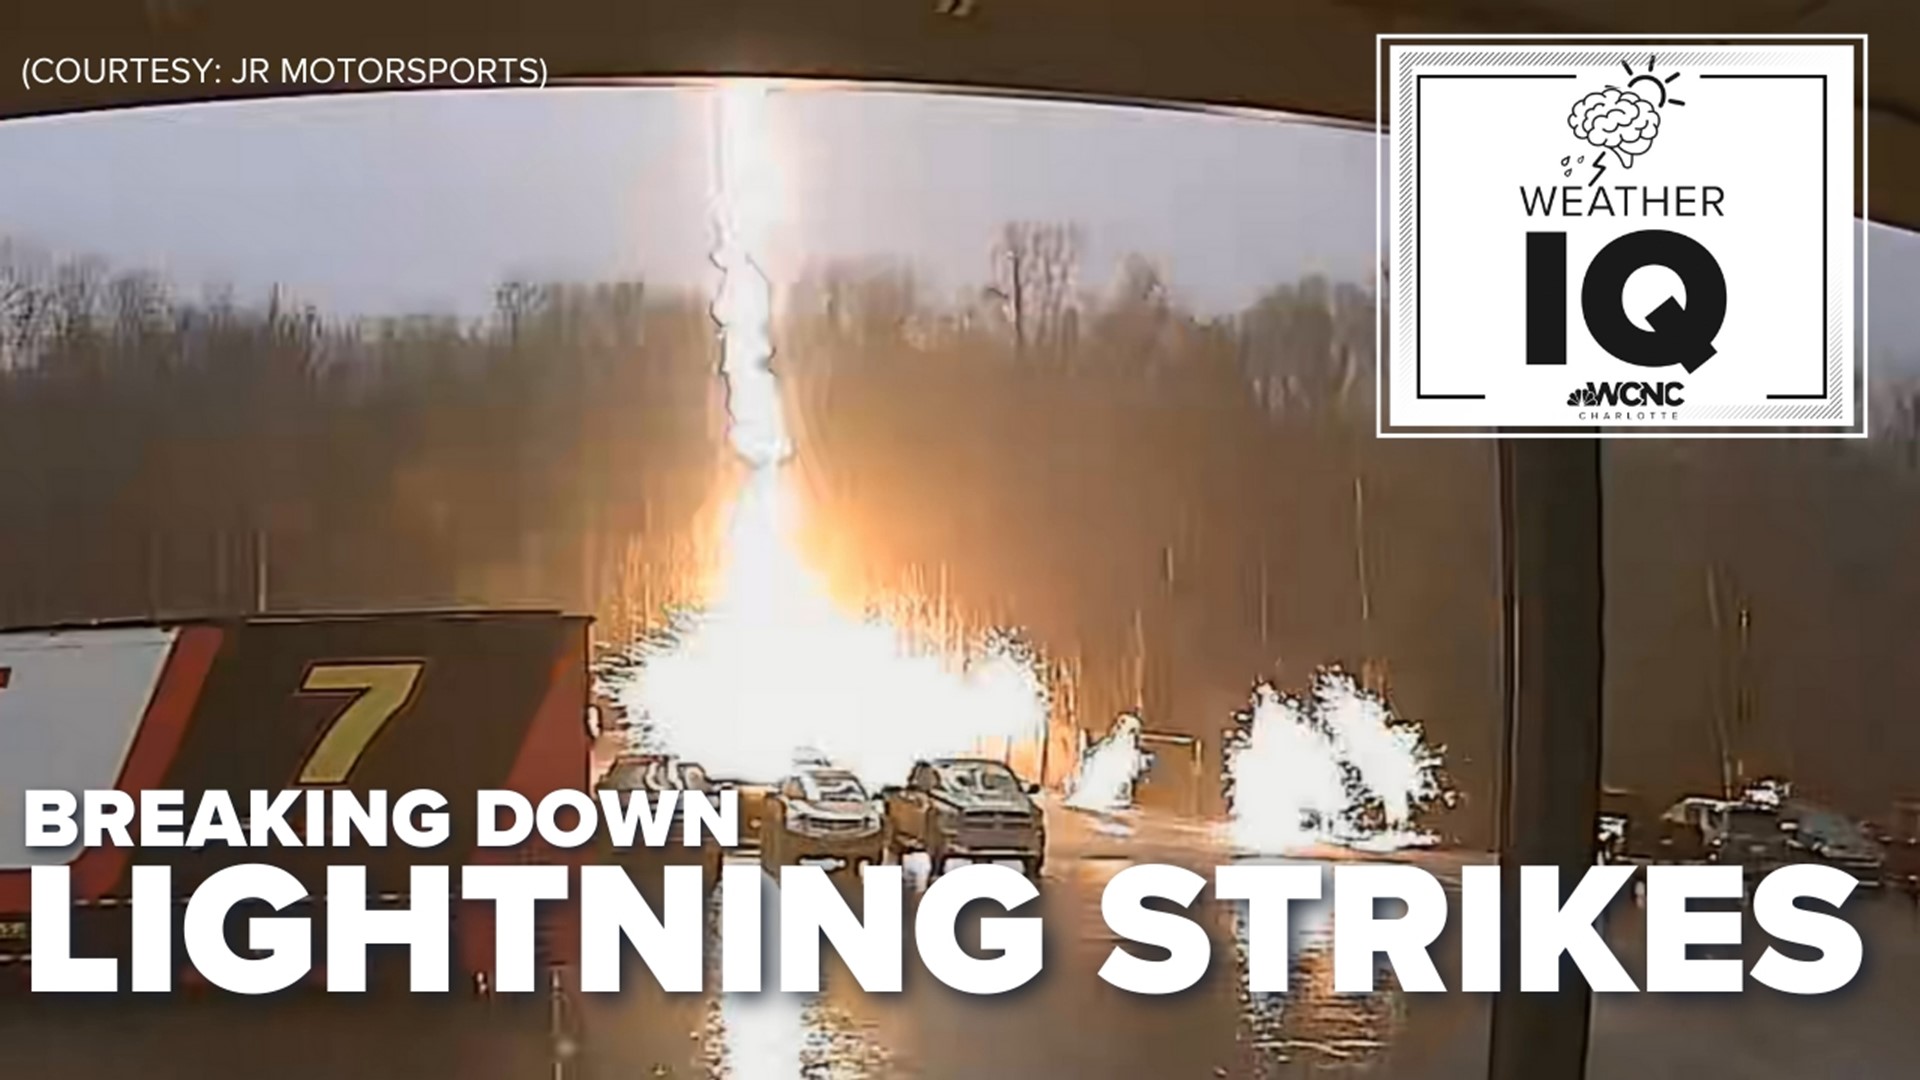 A lightning bolt caught on camera sending sparks flying in Mooresville. WCNC Charlotte Meteorologist KJ Jacobs explains what exactly we are seeing.